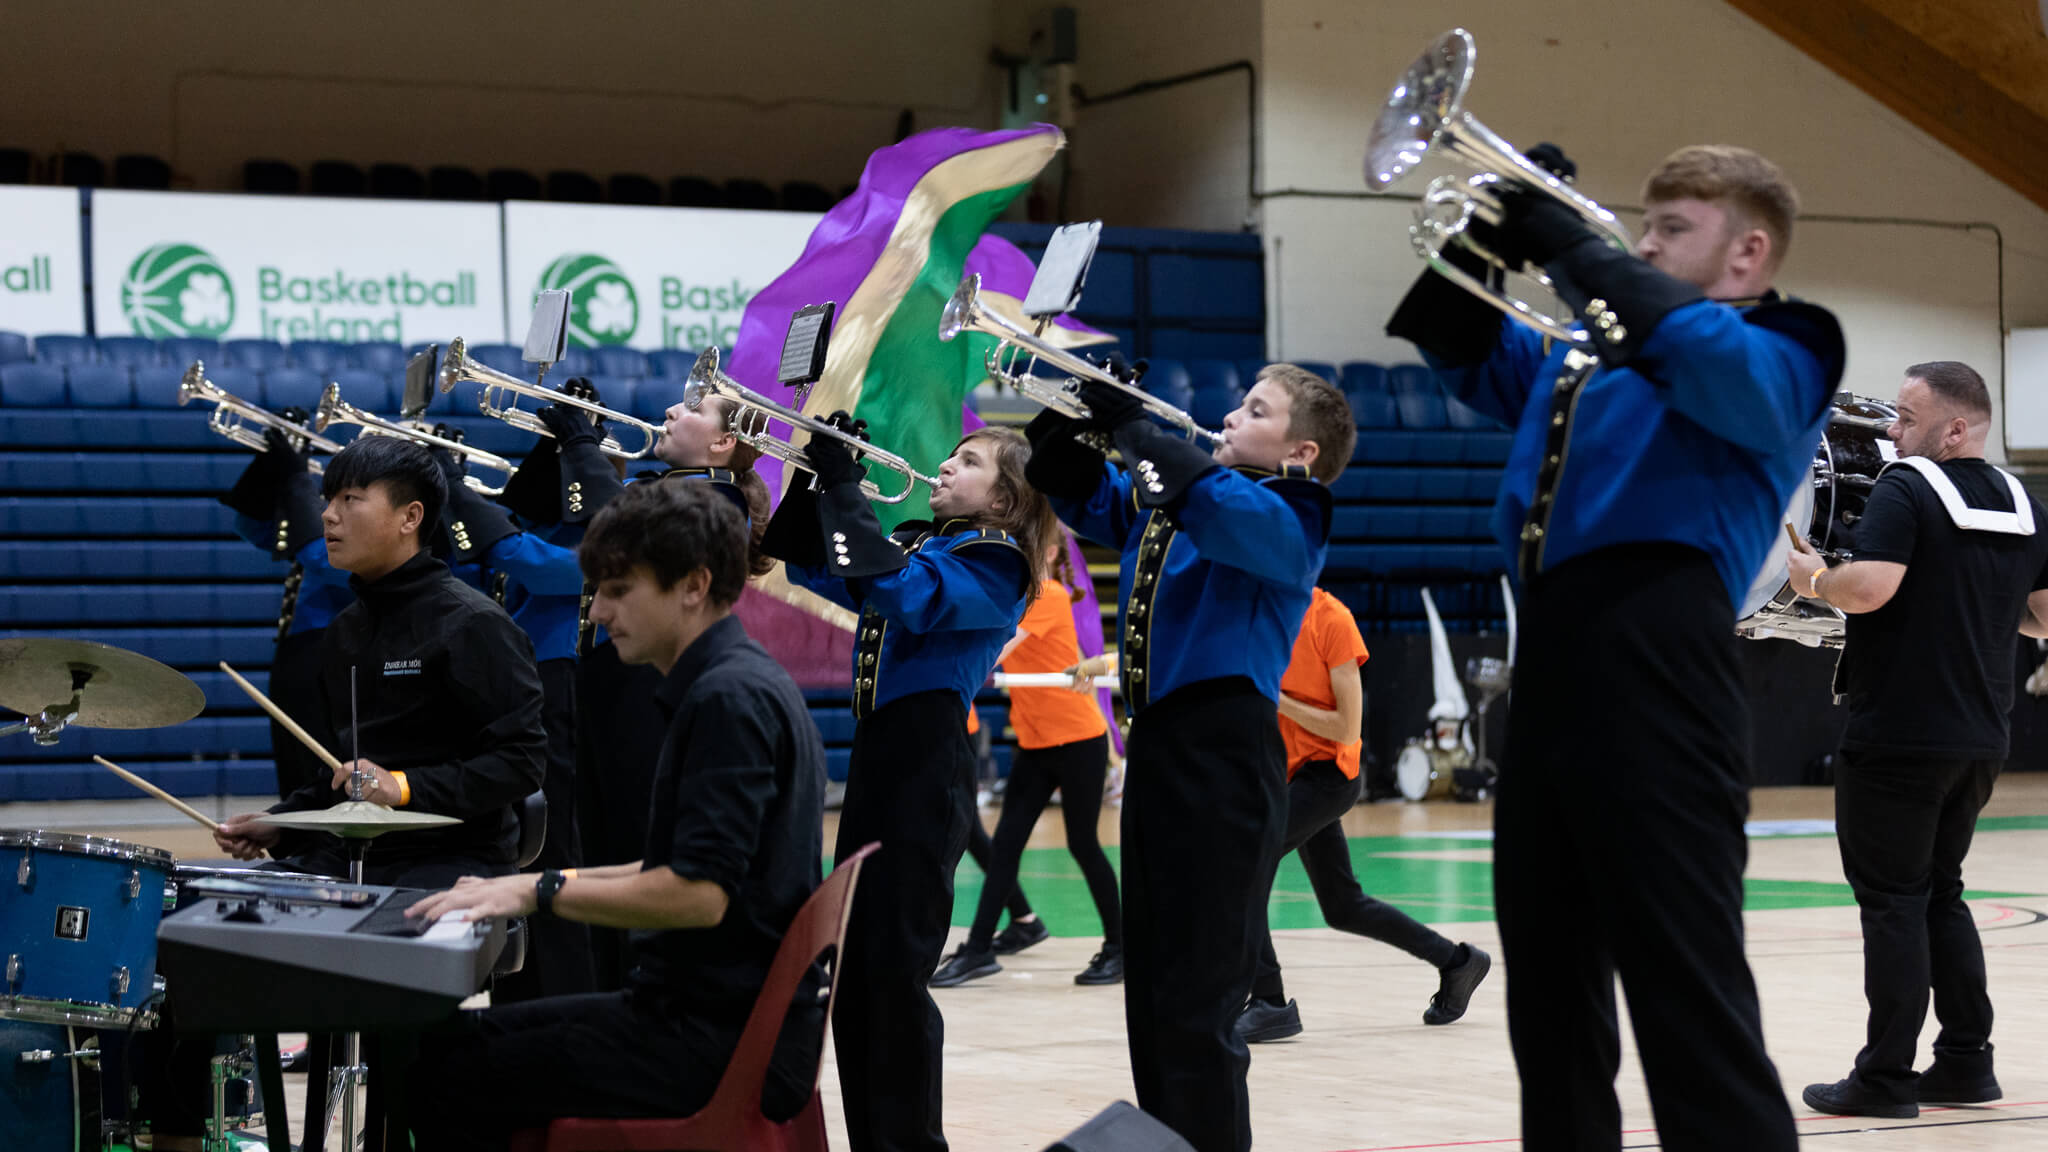 The Irish Marching Band Association Championshps took place September 17 in Dublin.